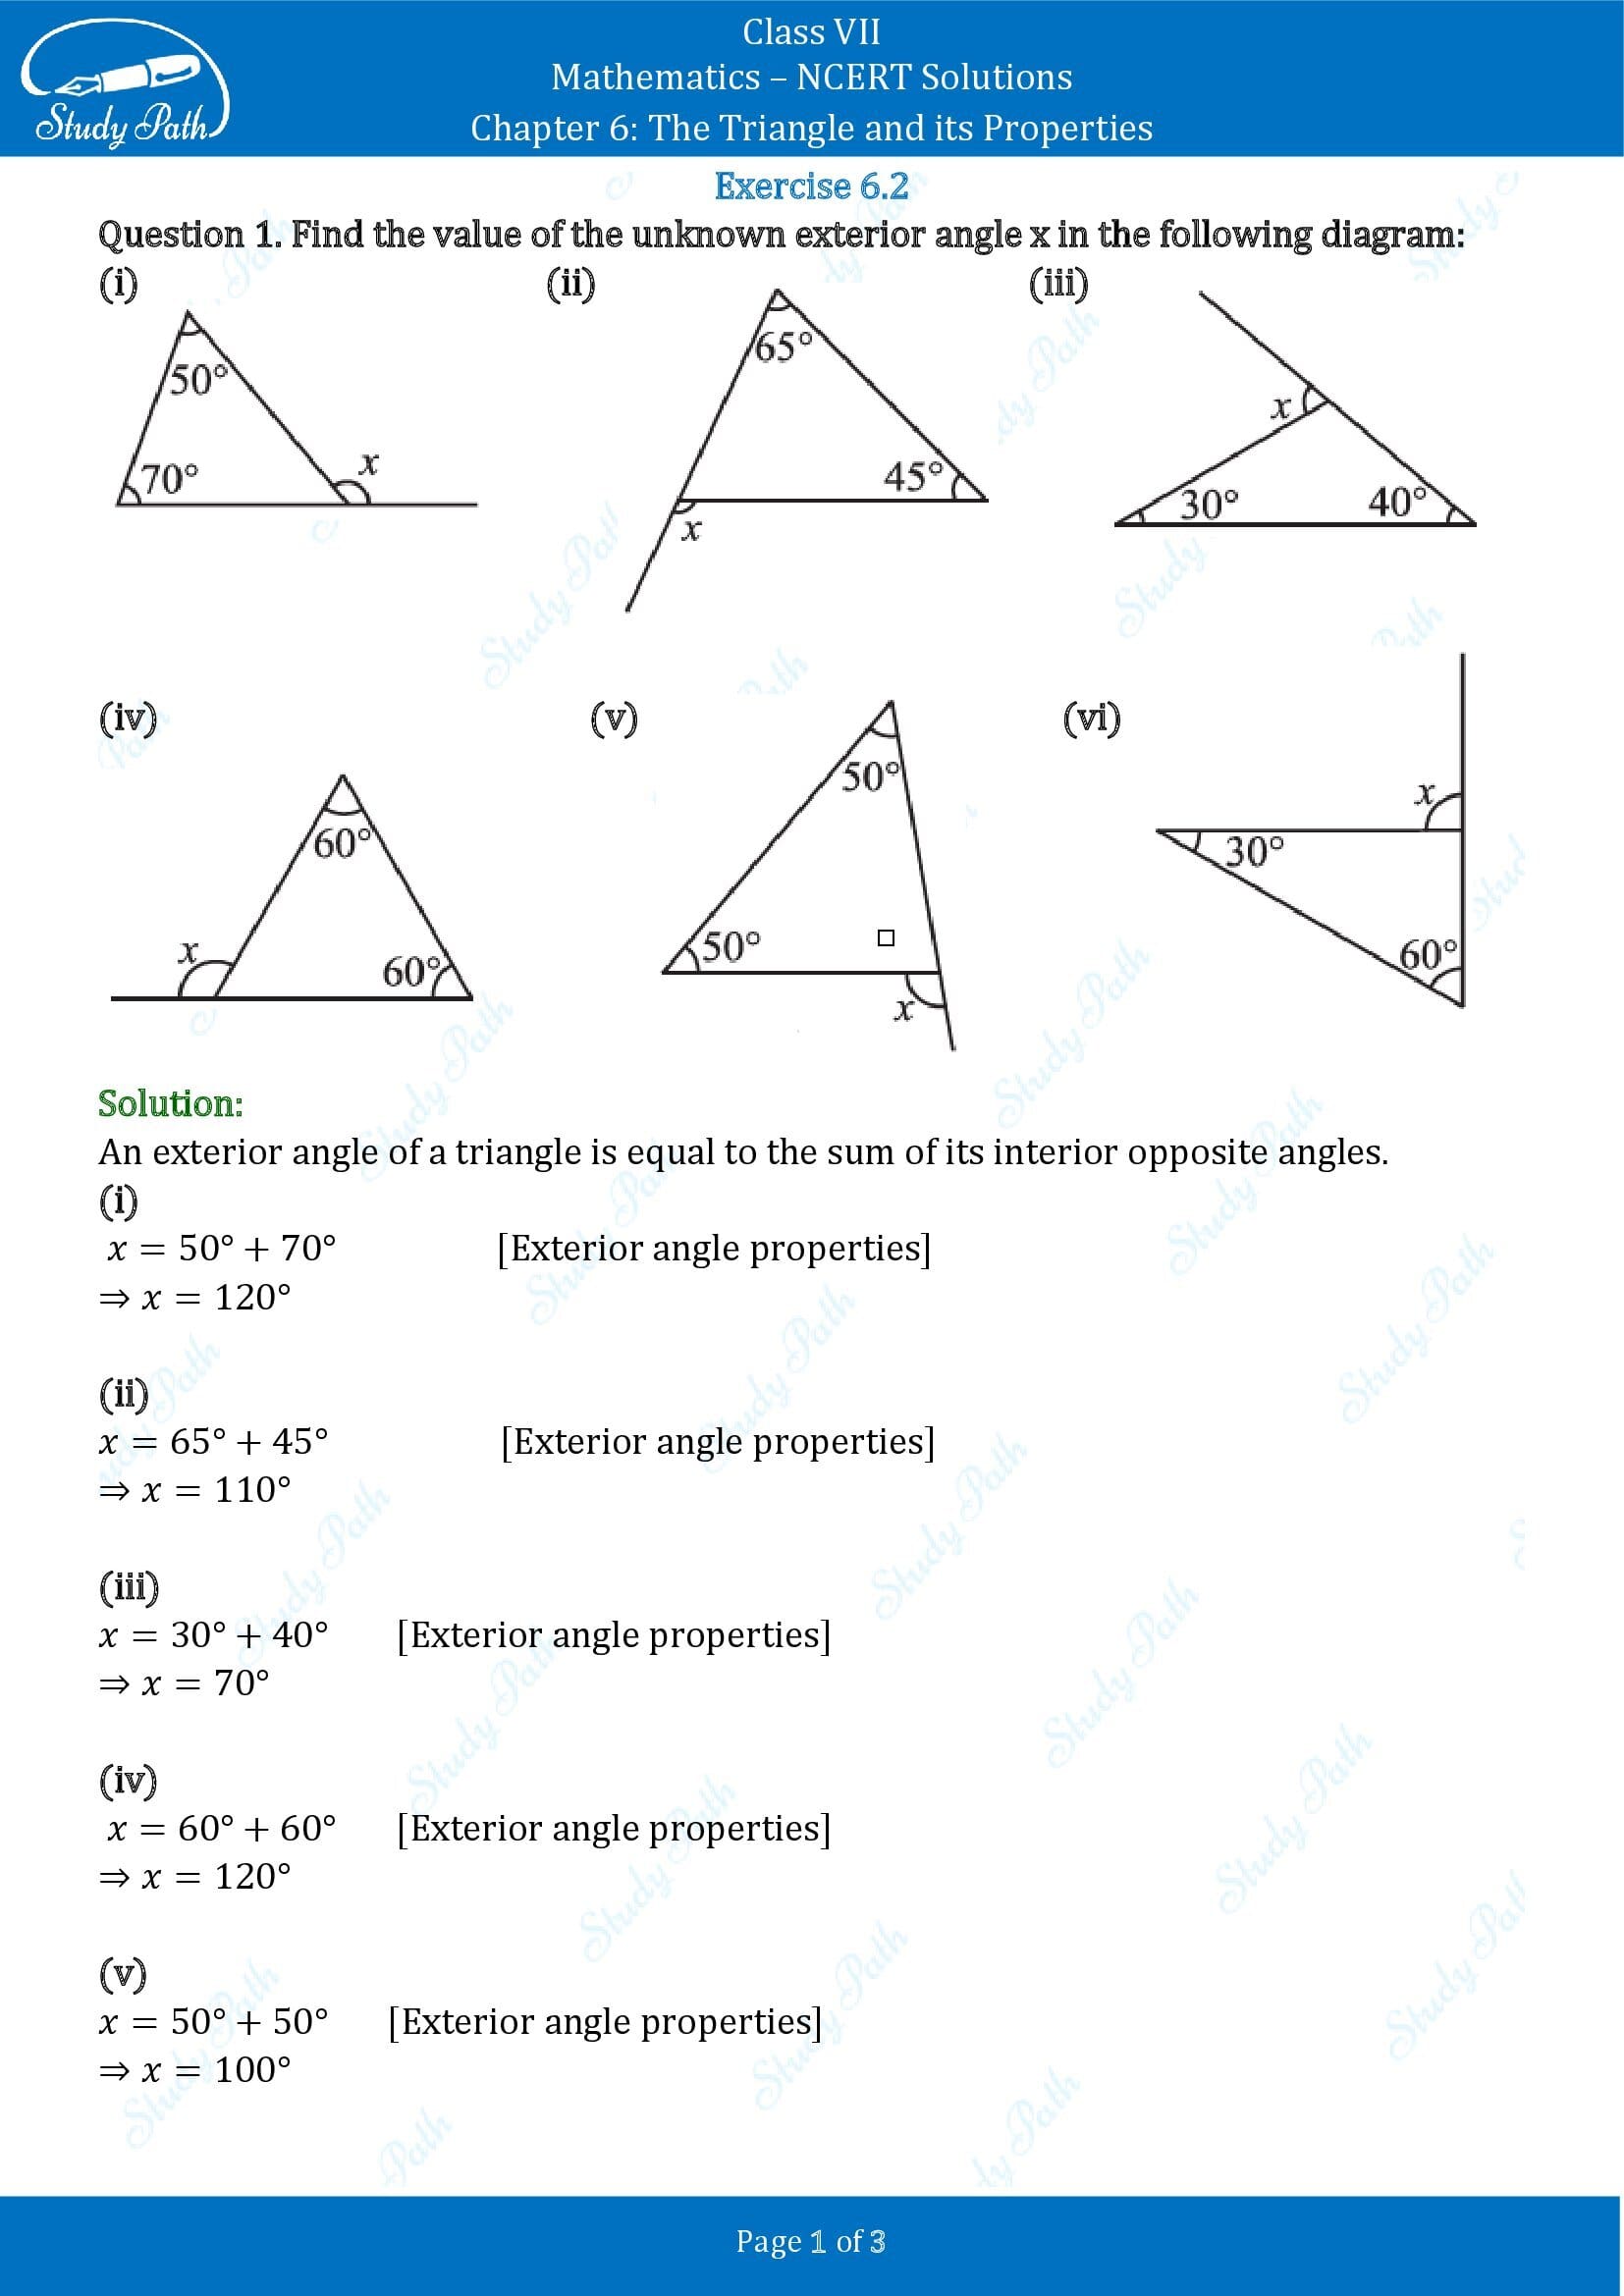 NCERT Solutions for Class 7 Maths Chapter 6 The Triangle and its Properties Exercise 6.2 00001